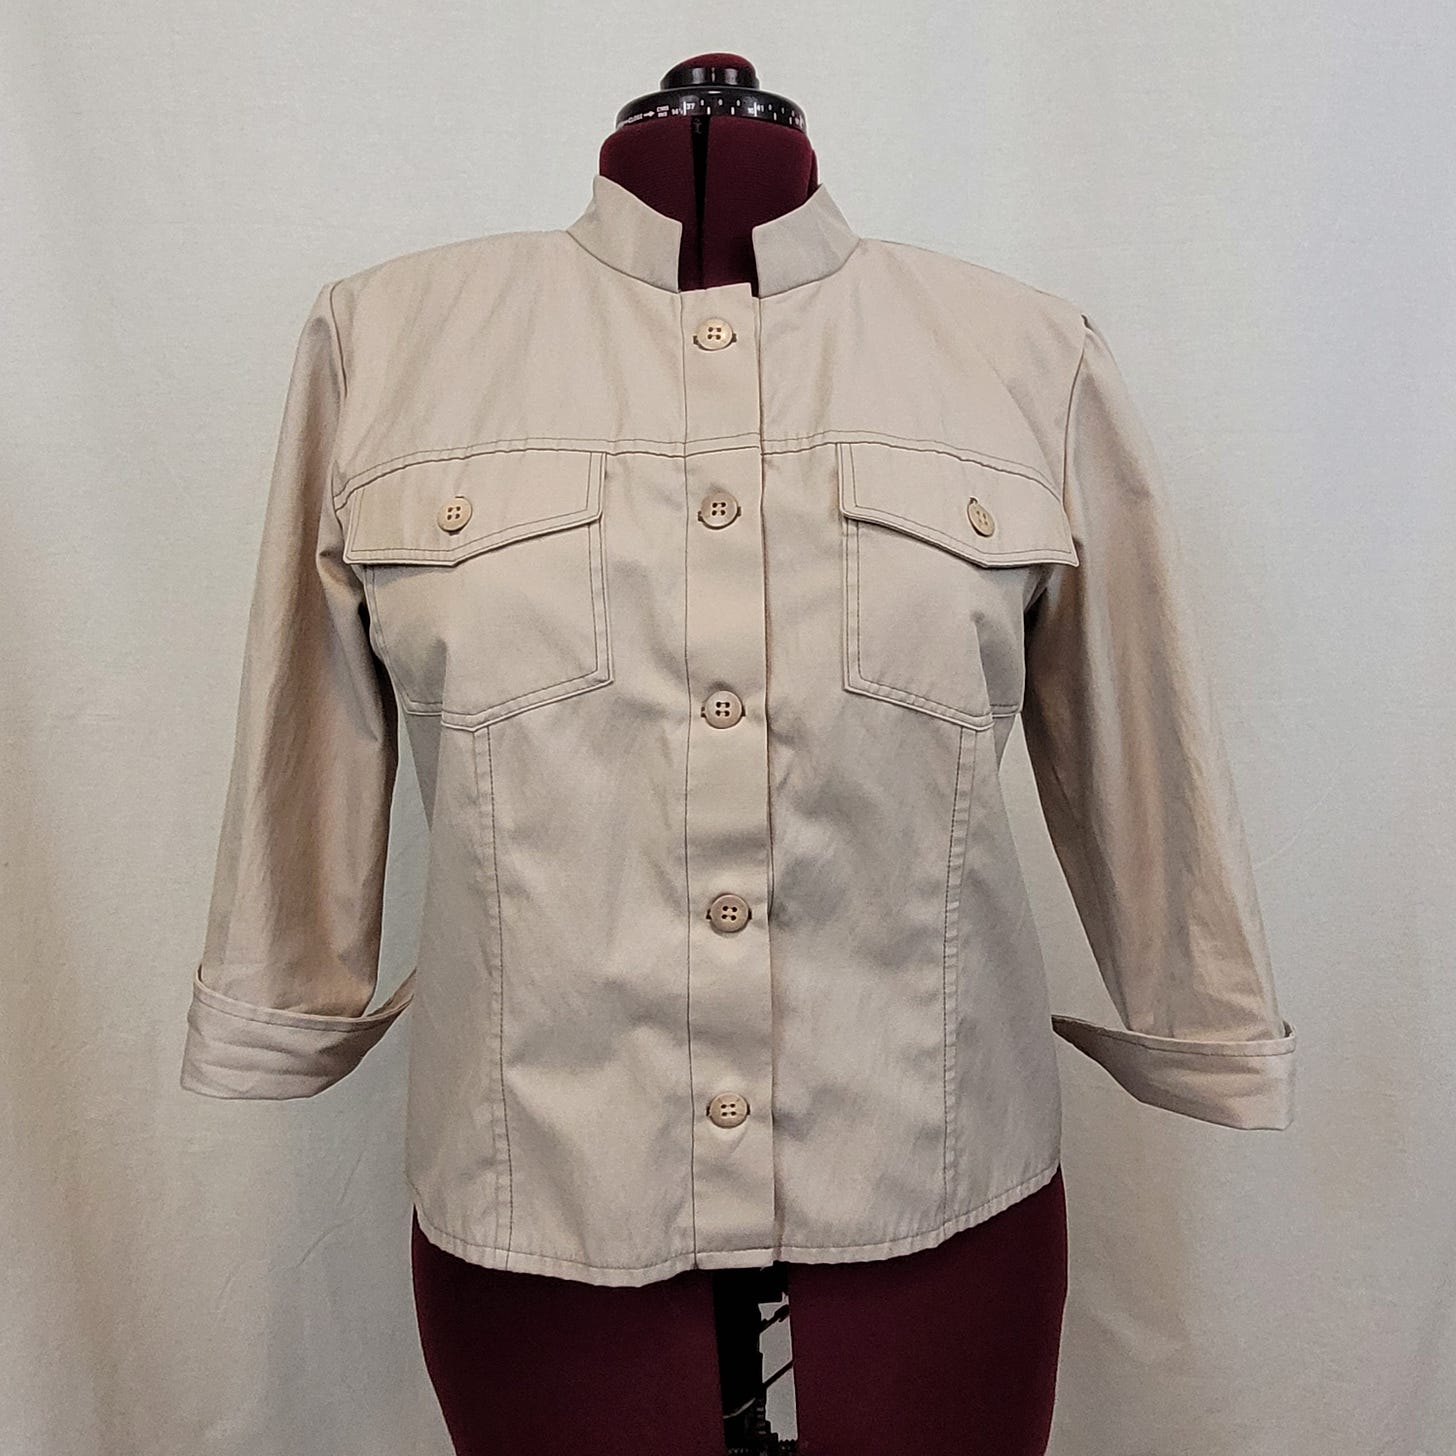 Handmade jacket in a taupe cotton poly fabric with gray topstitching and 3/4 length sleeves